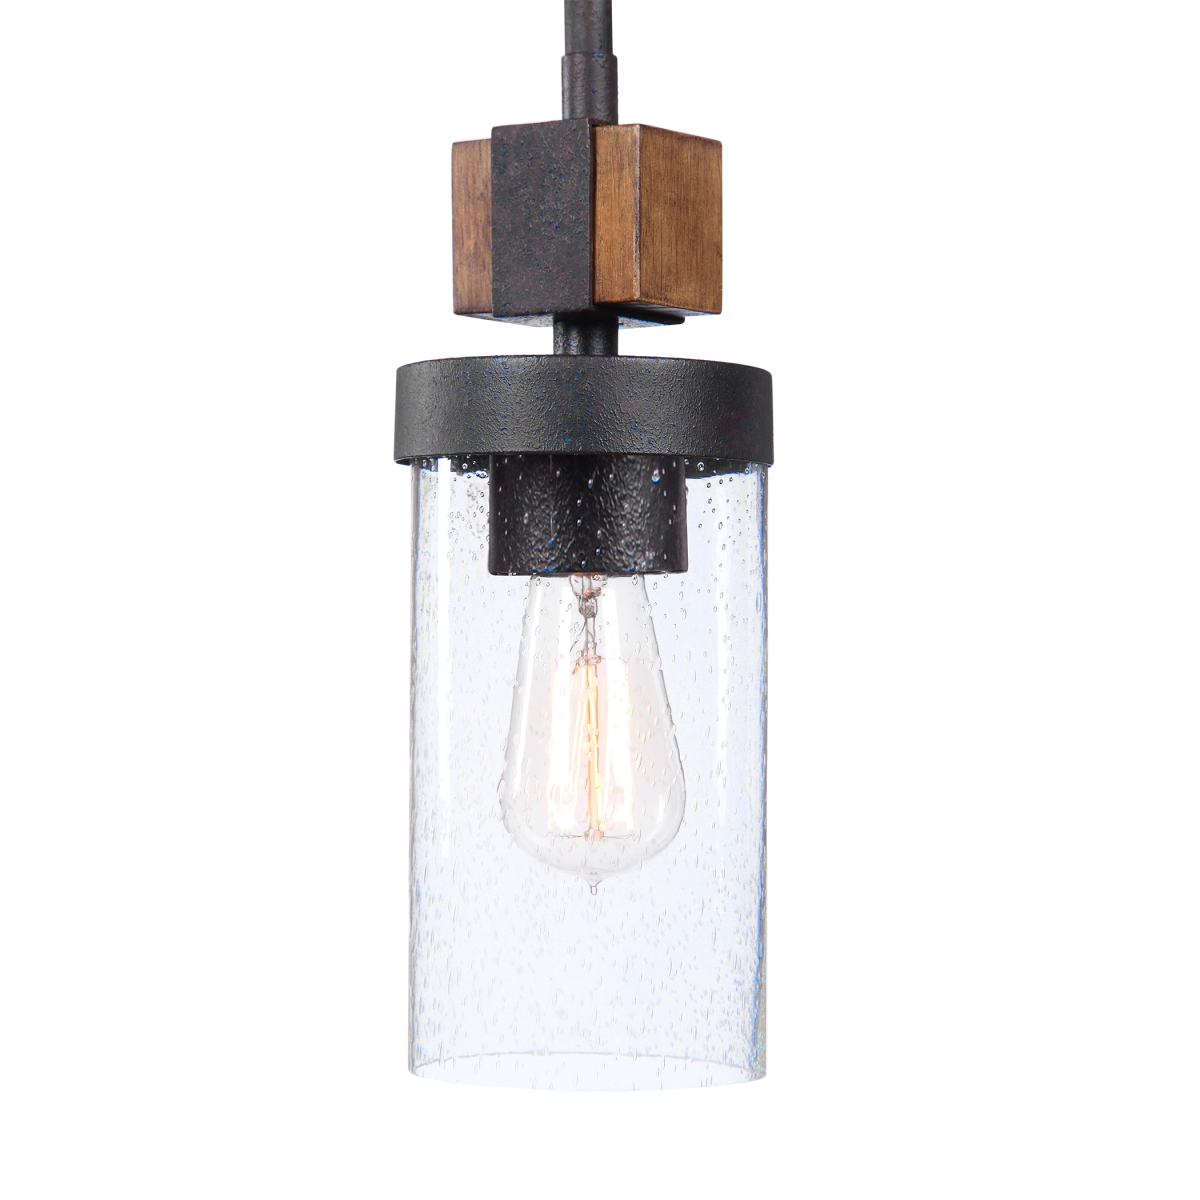 Picture of 212 Main 22195 Atwood 1 Light Industrial Mini Pendant